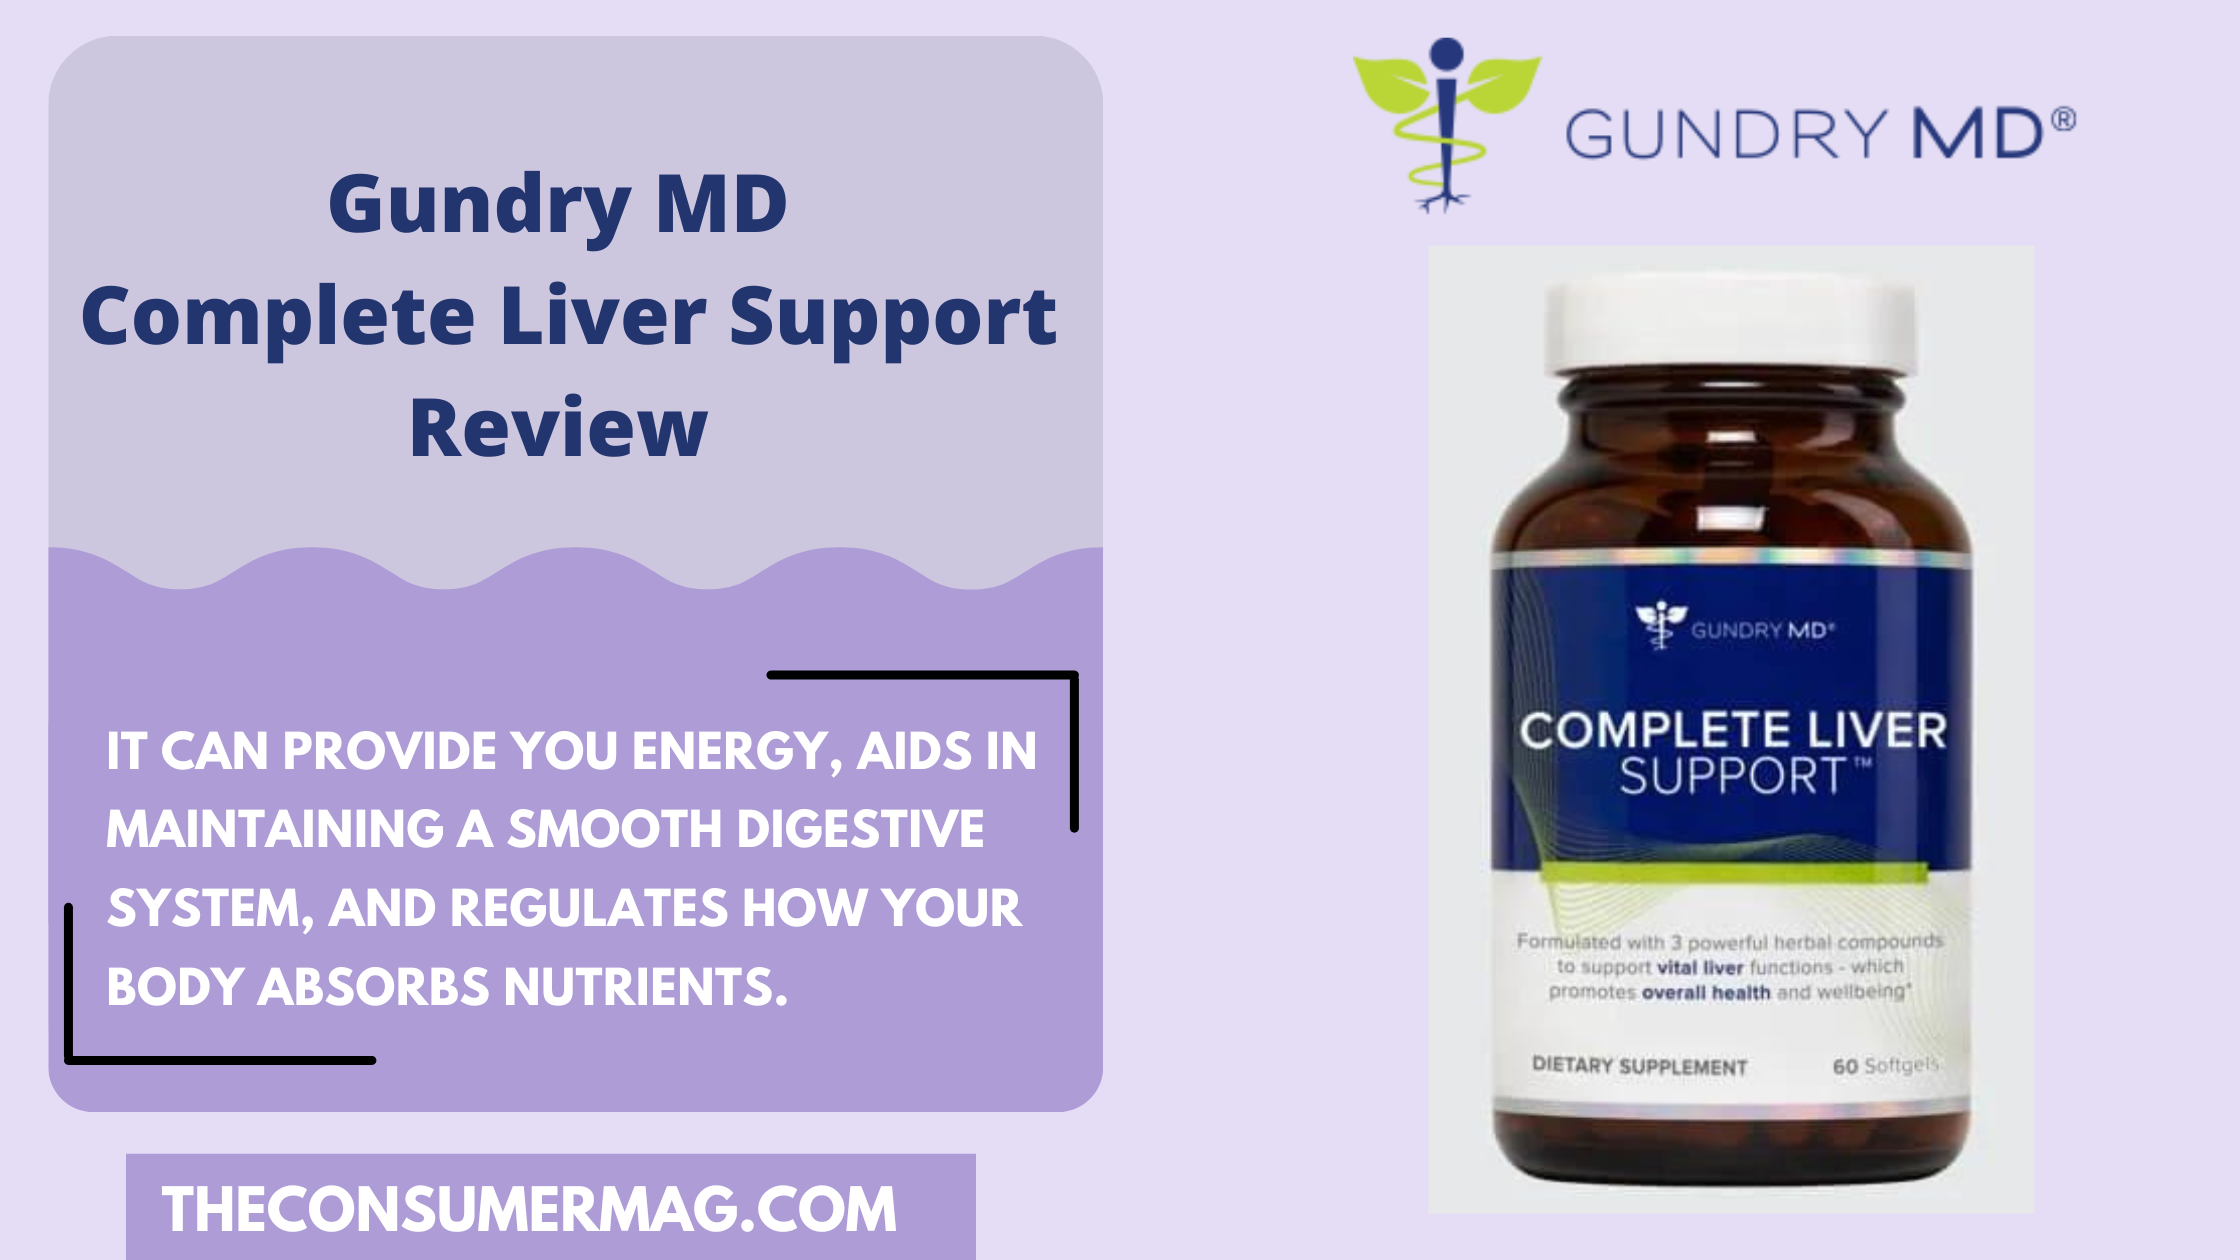 Complete Liver Support featured image